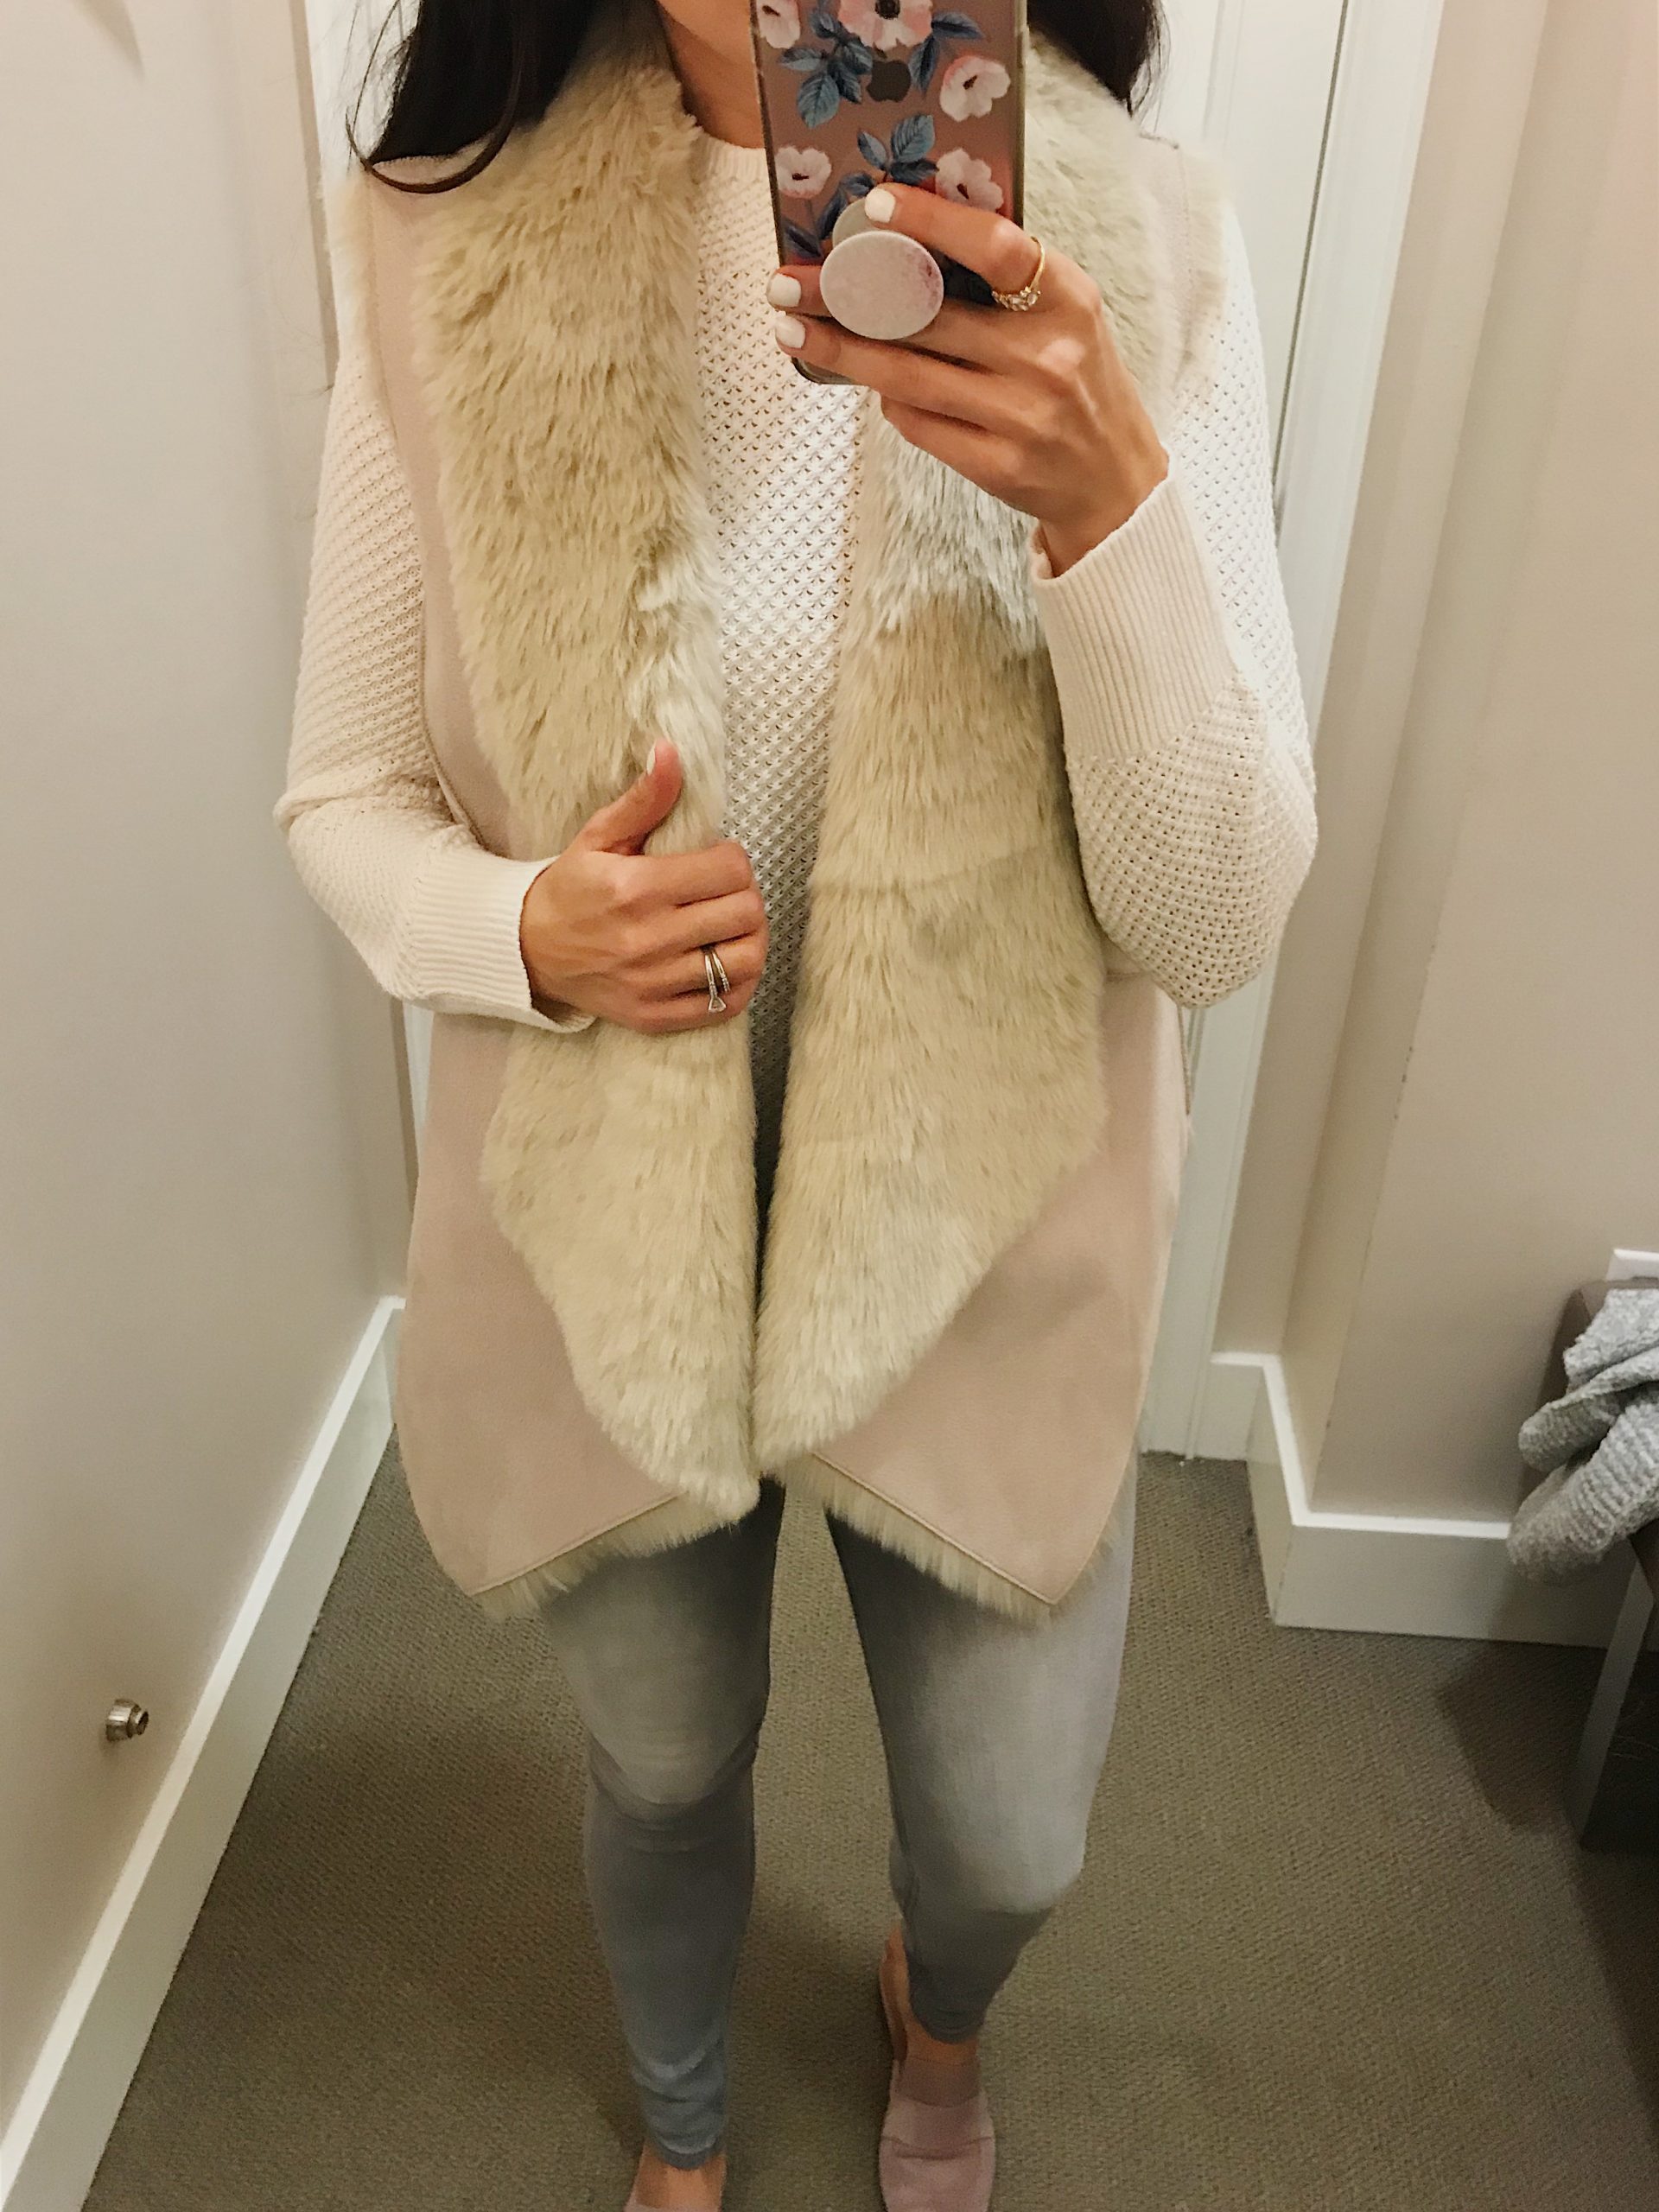 sherpa vest outfit for fall from LOFT sale